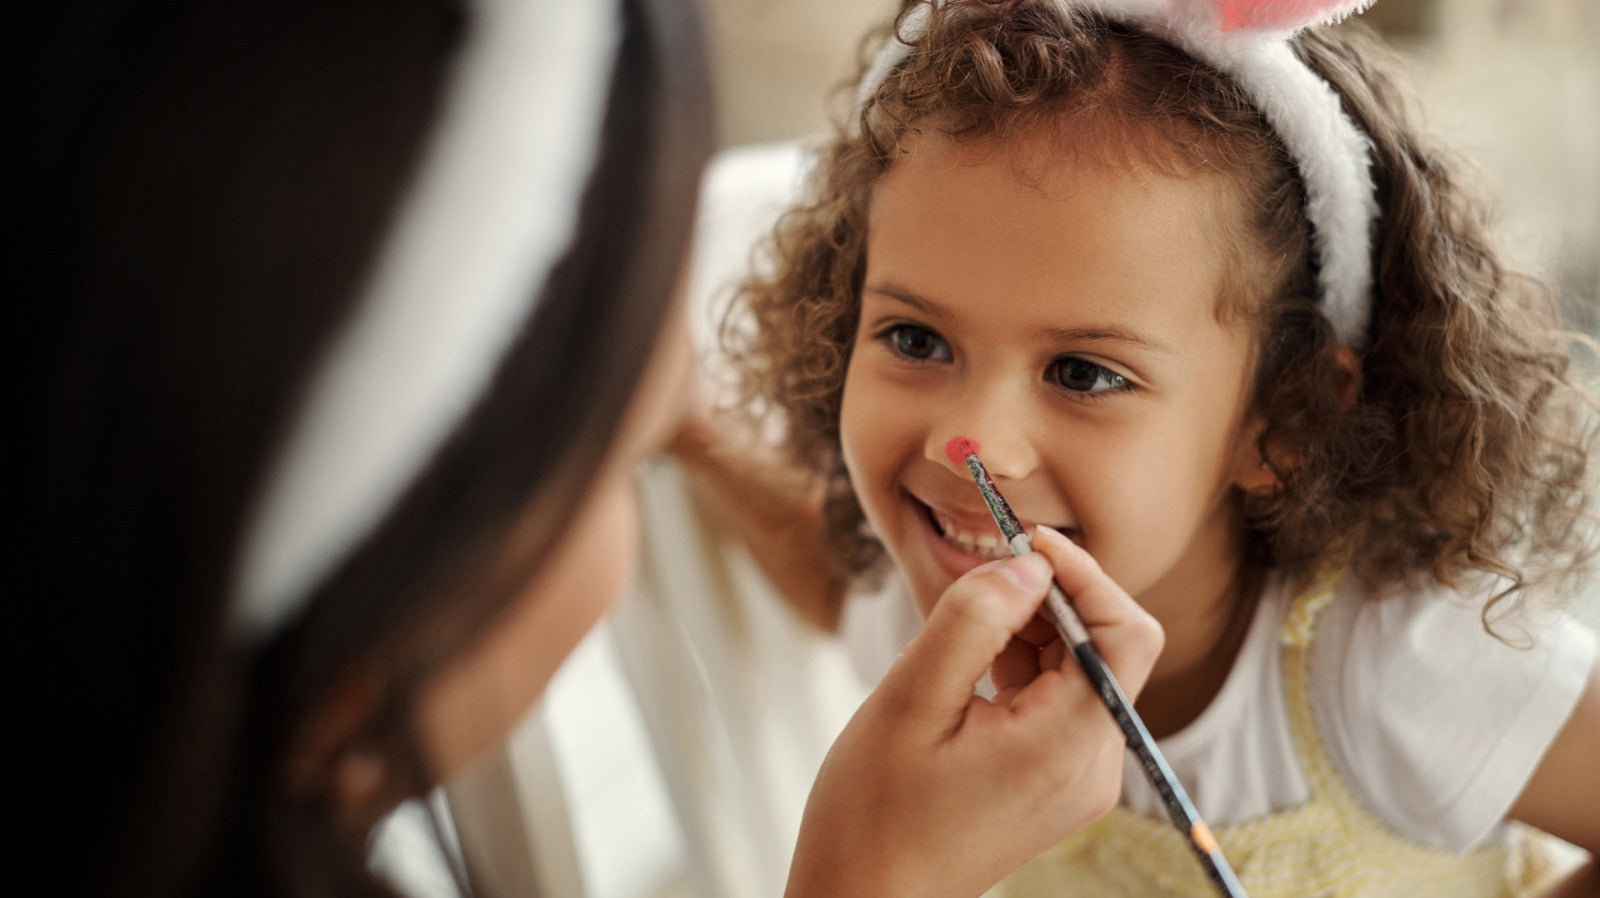 Here's why you should make your own face paints for Halloween with your kids.